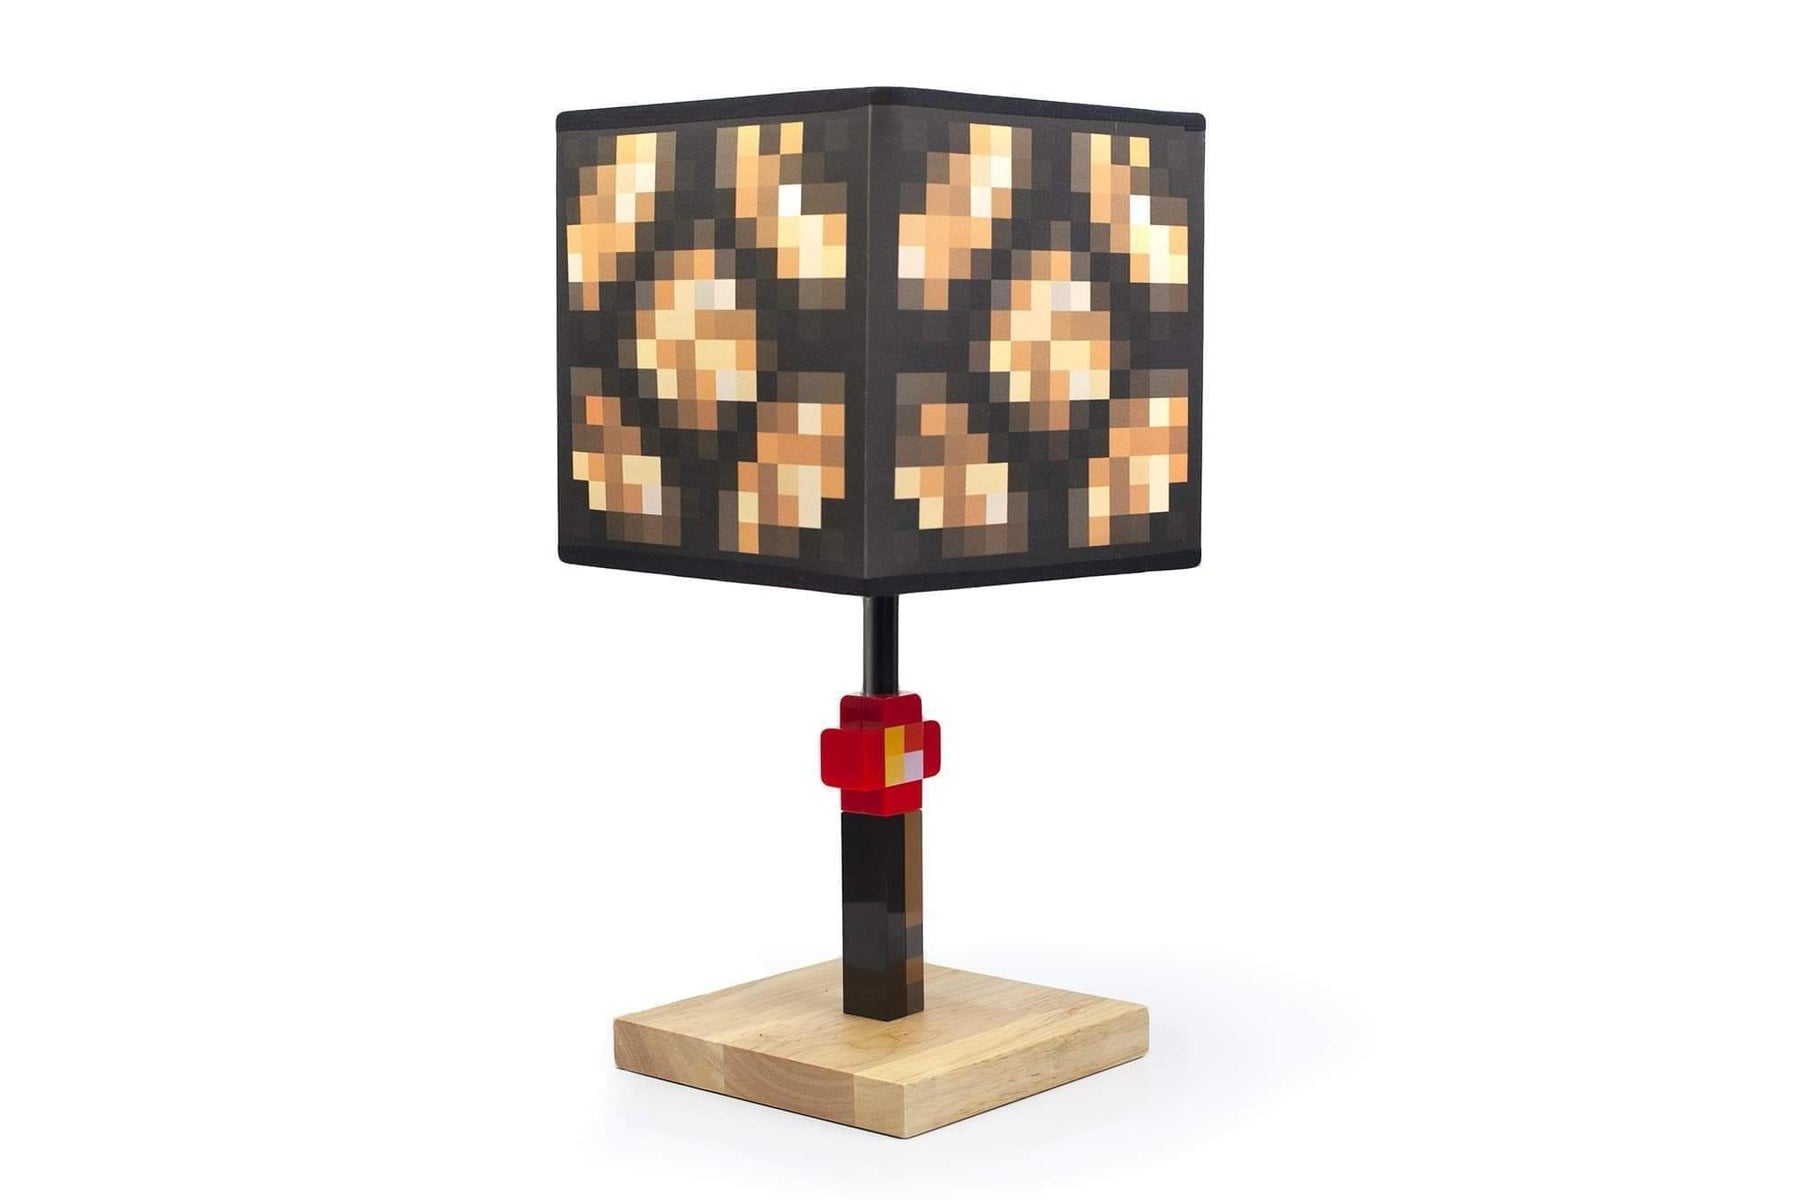 Minecraft Glowstone 14 Inch Corded Desk LED Bedside Night Light Lamp for Gamers